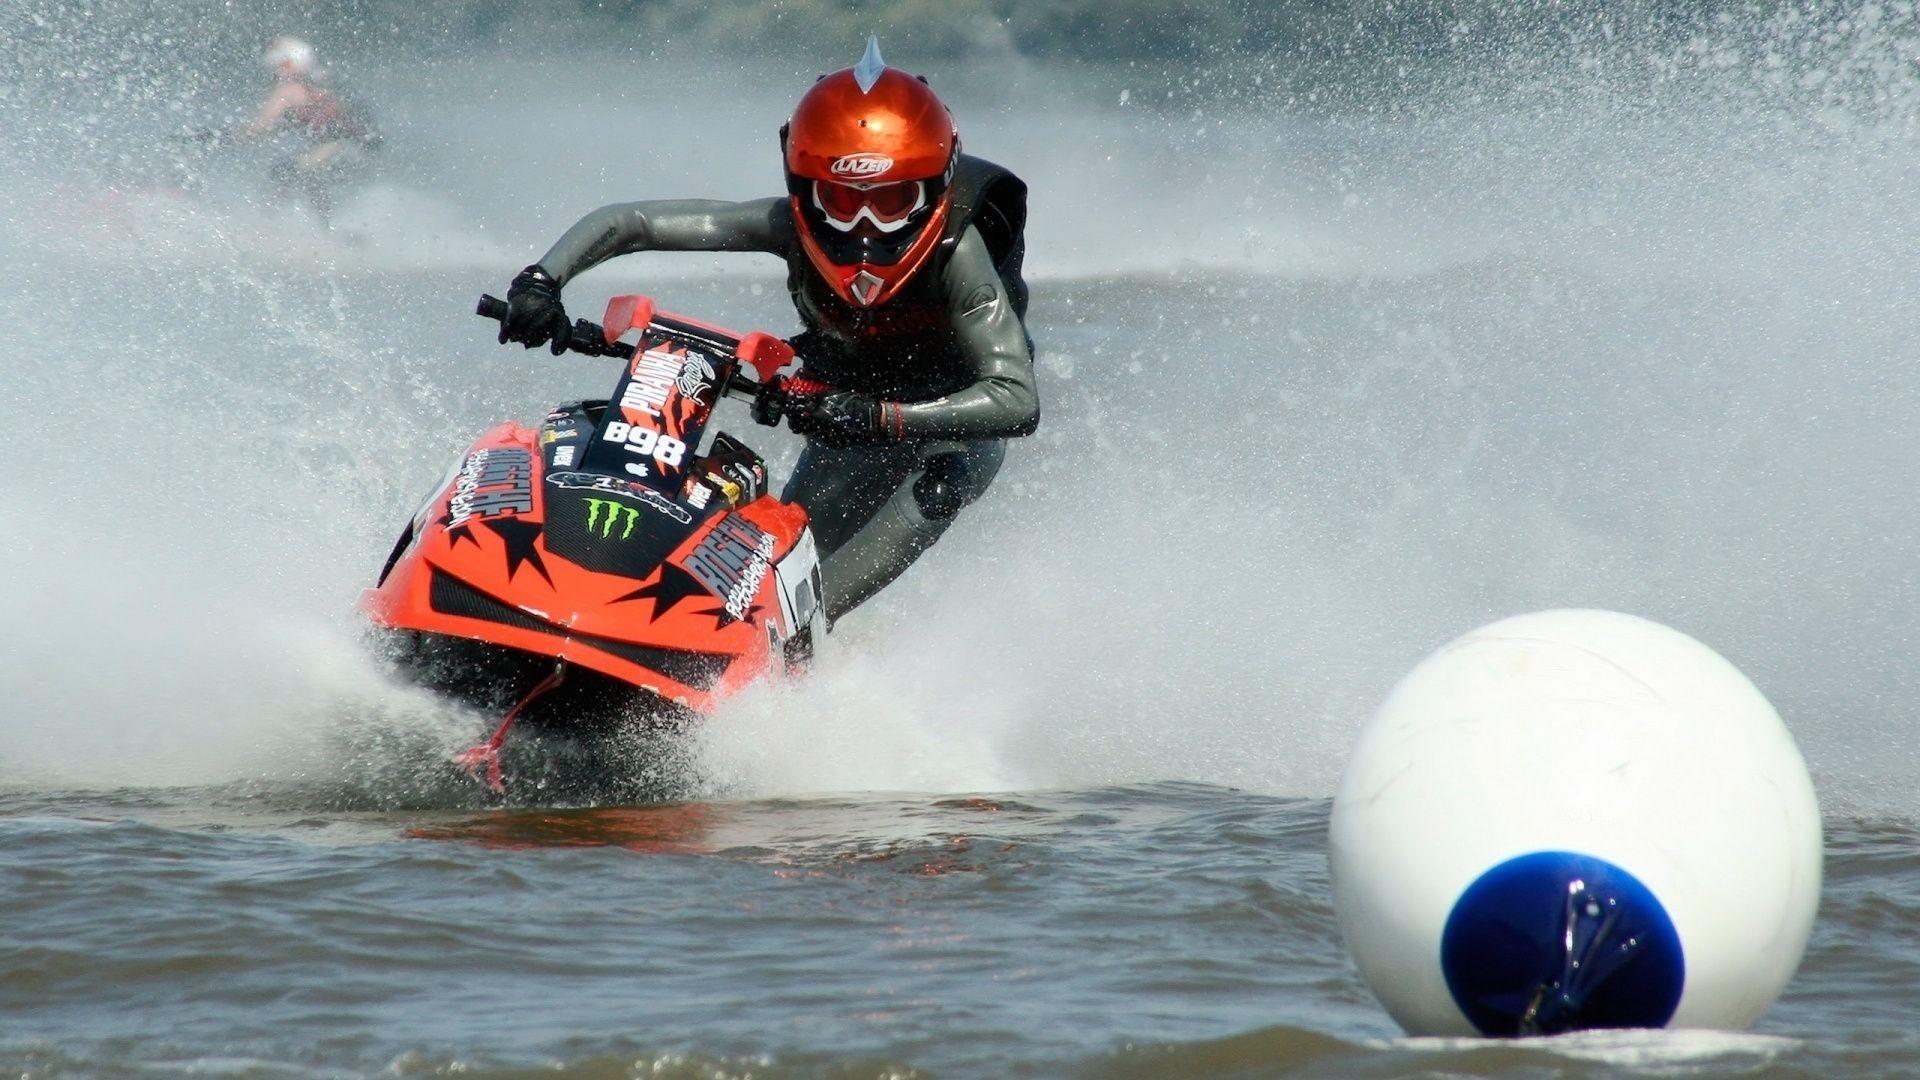 Download 1920x1080 Wallpaper Jetboat, Racing, Powerboating, Scooter